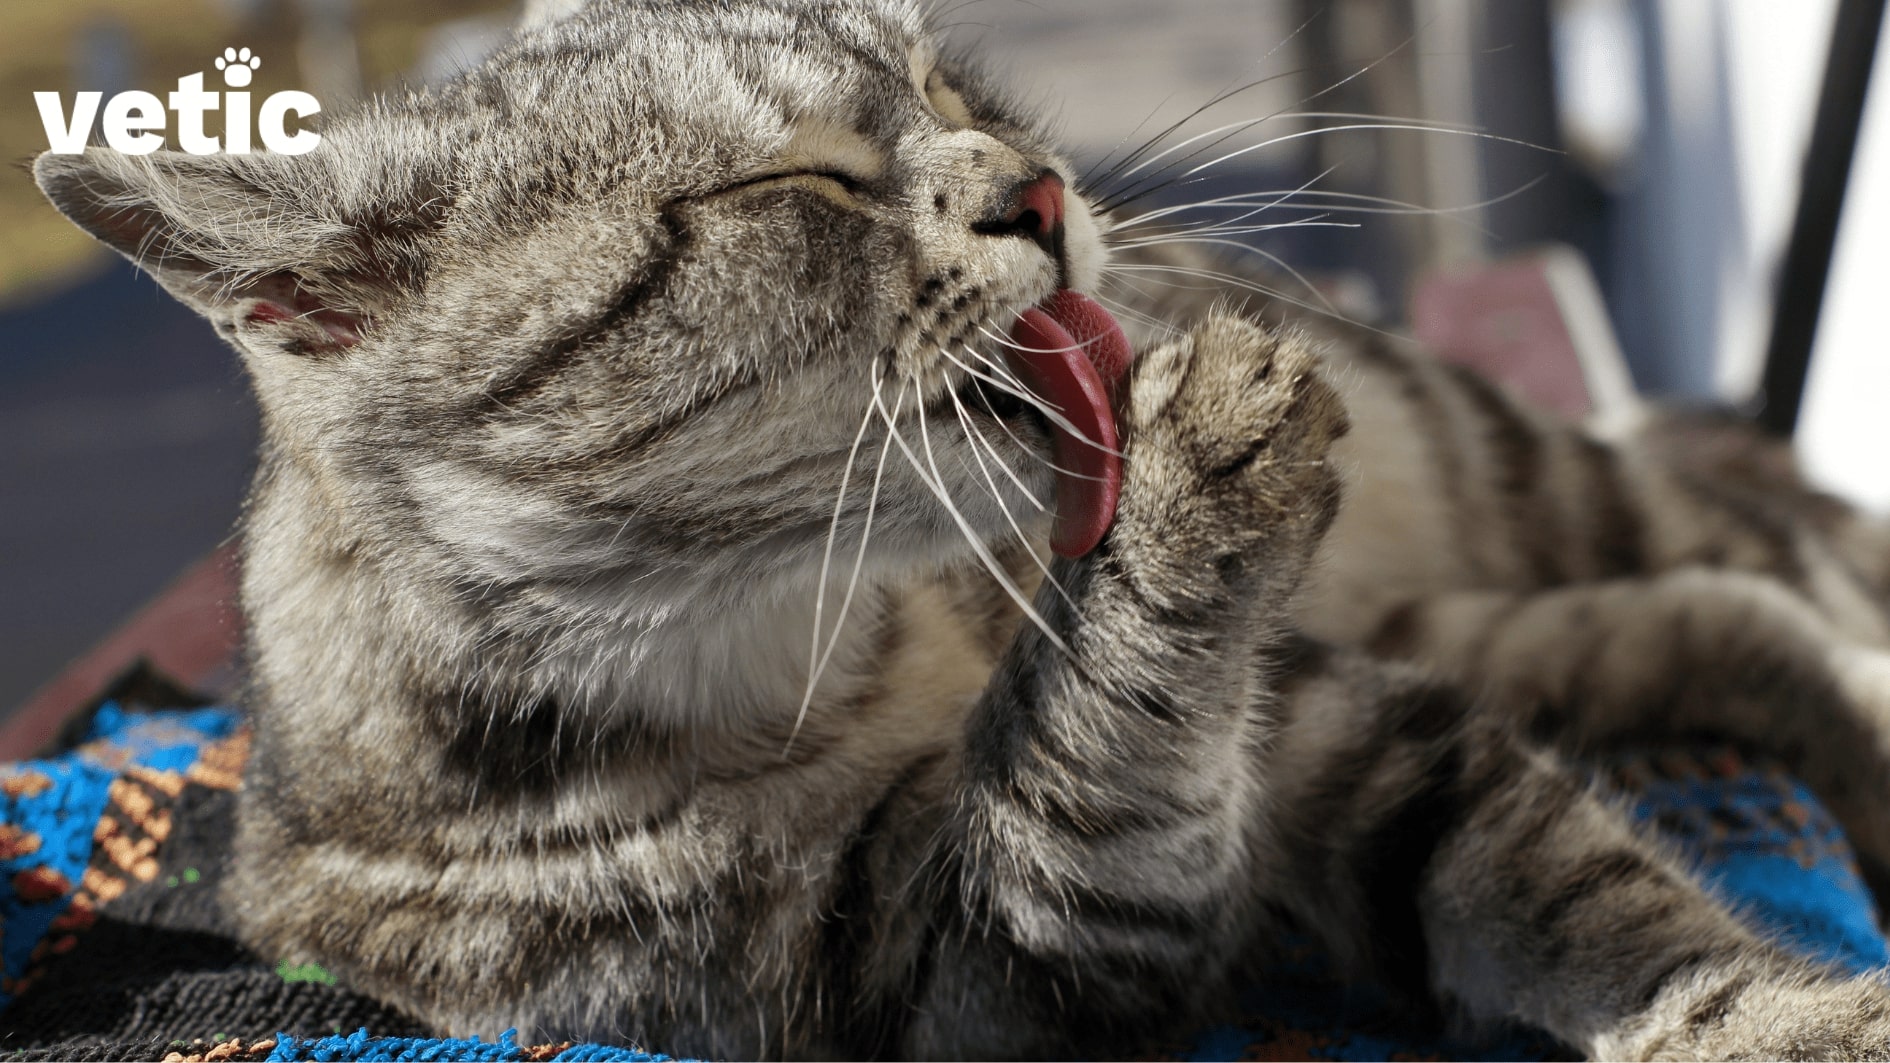 Mackerel cat grooming their paws. Leaving your cat alone for long hours frequently can cause anxiety-induced behaviours such as increased grooming.